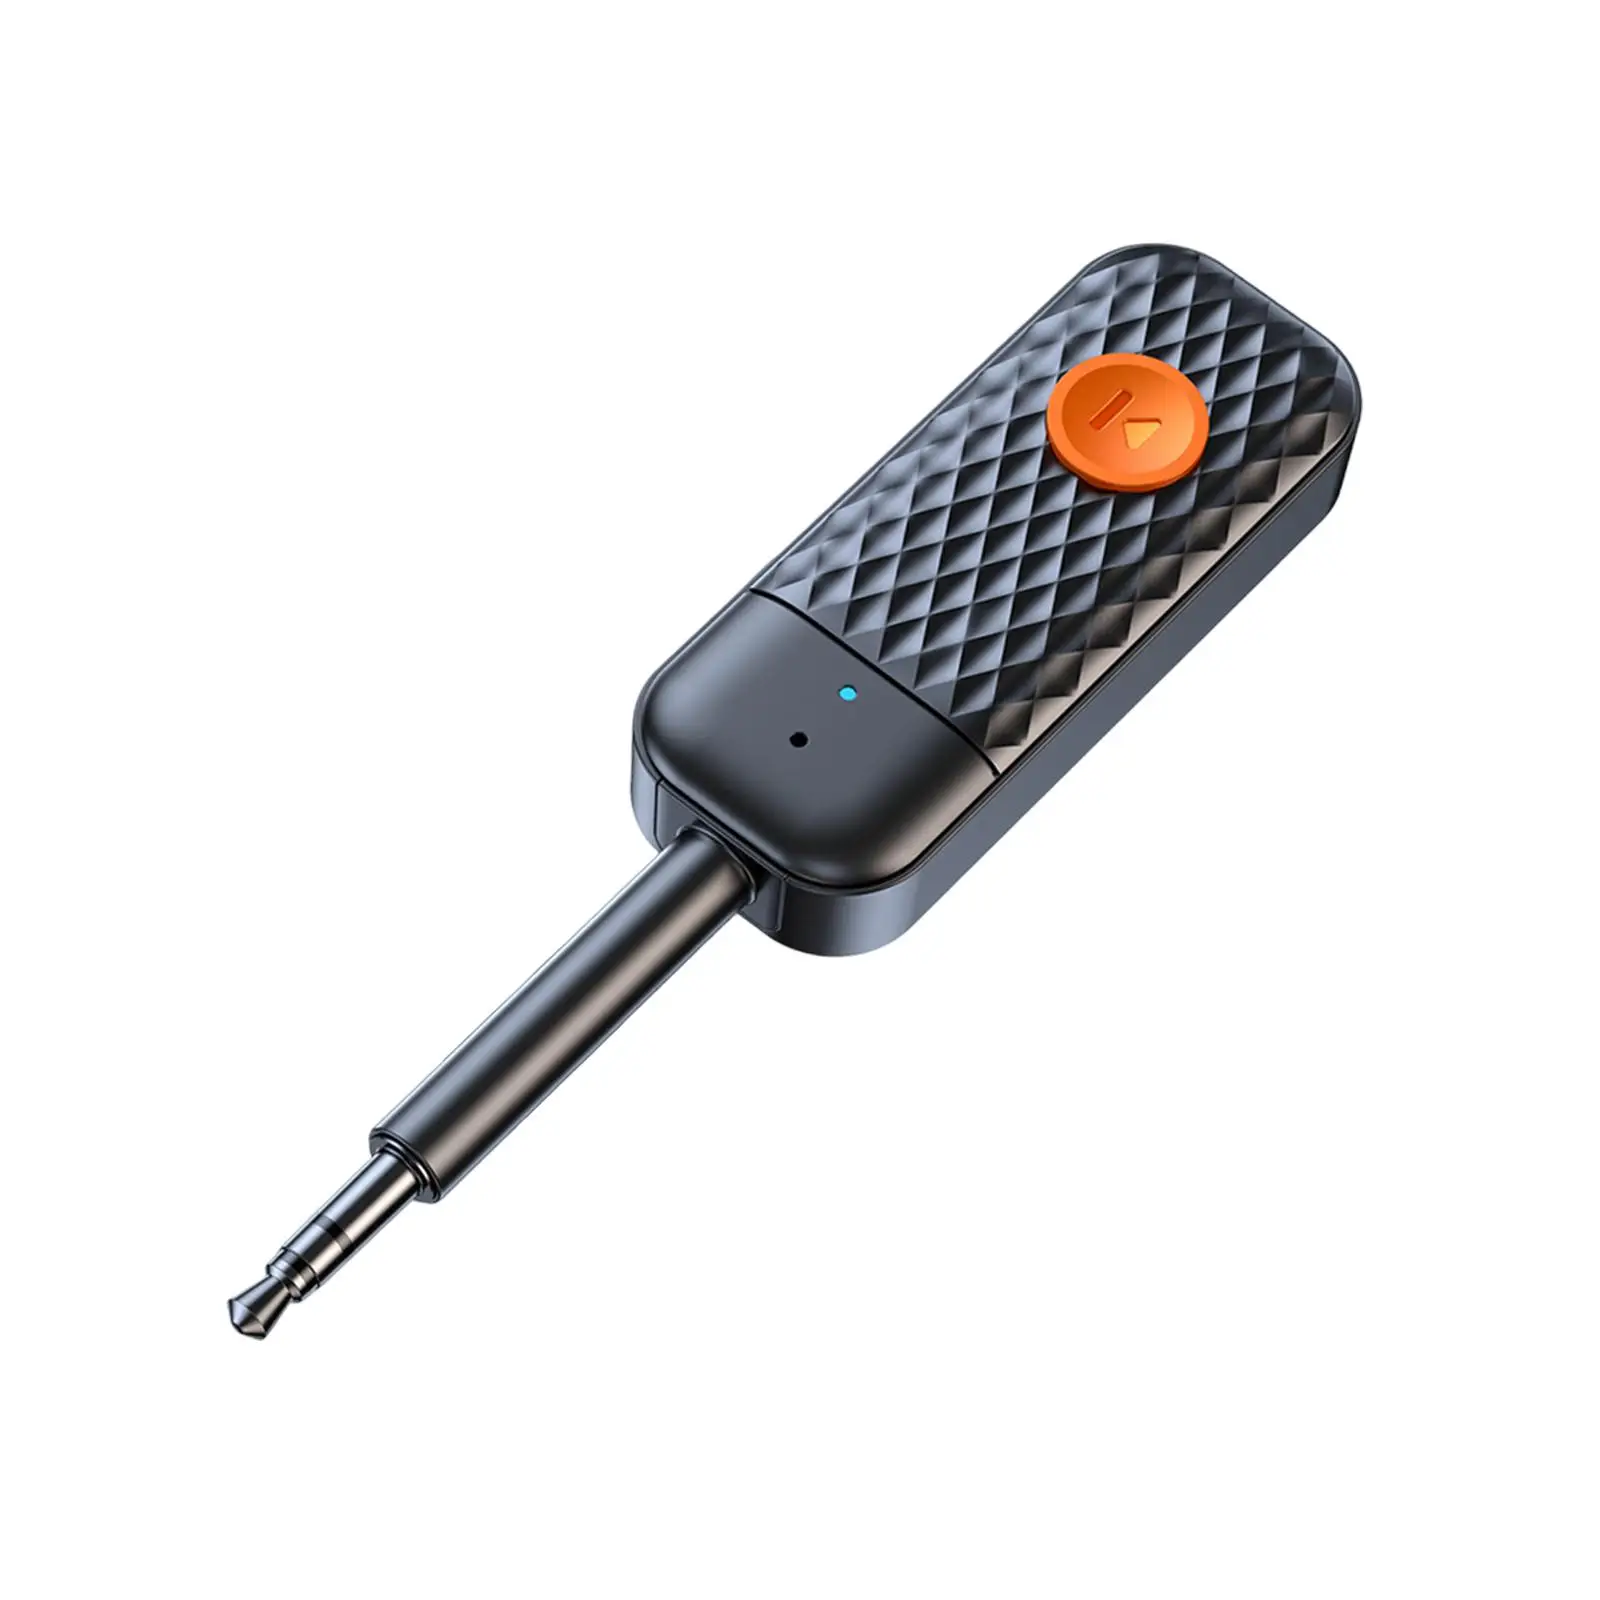 Wireless 3.5mm Car AUX Adapter Bluetooth Good Companion for Drivers Good performance Compact Transmitter and Receiver